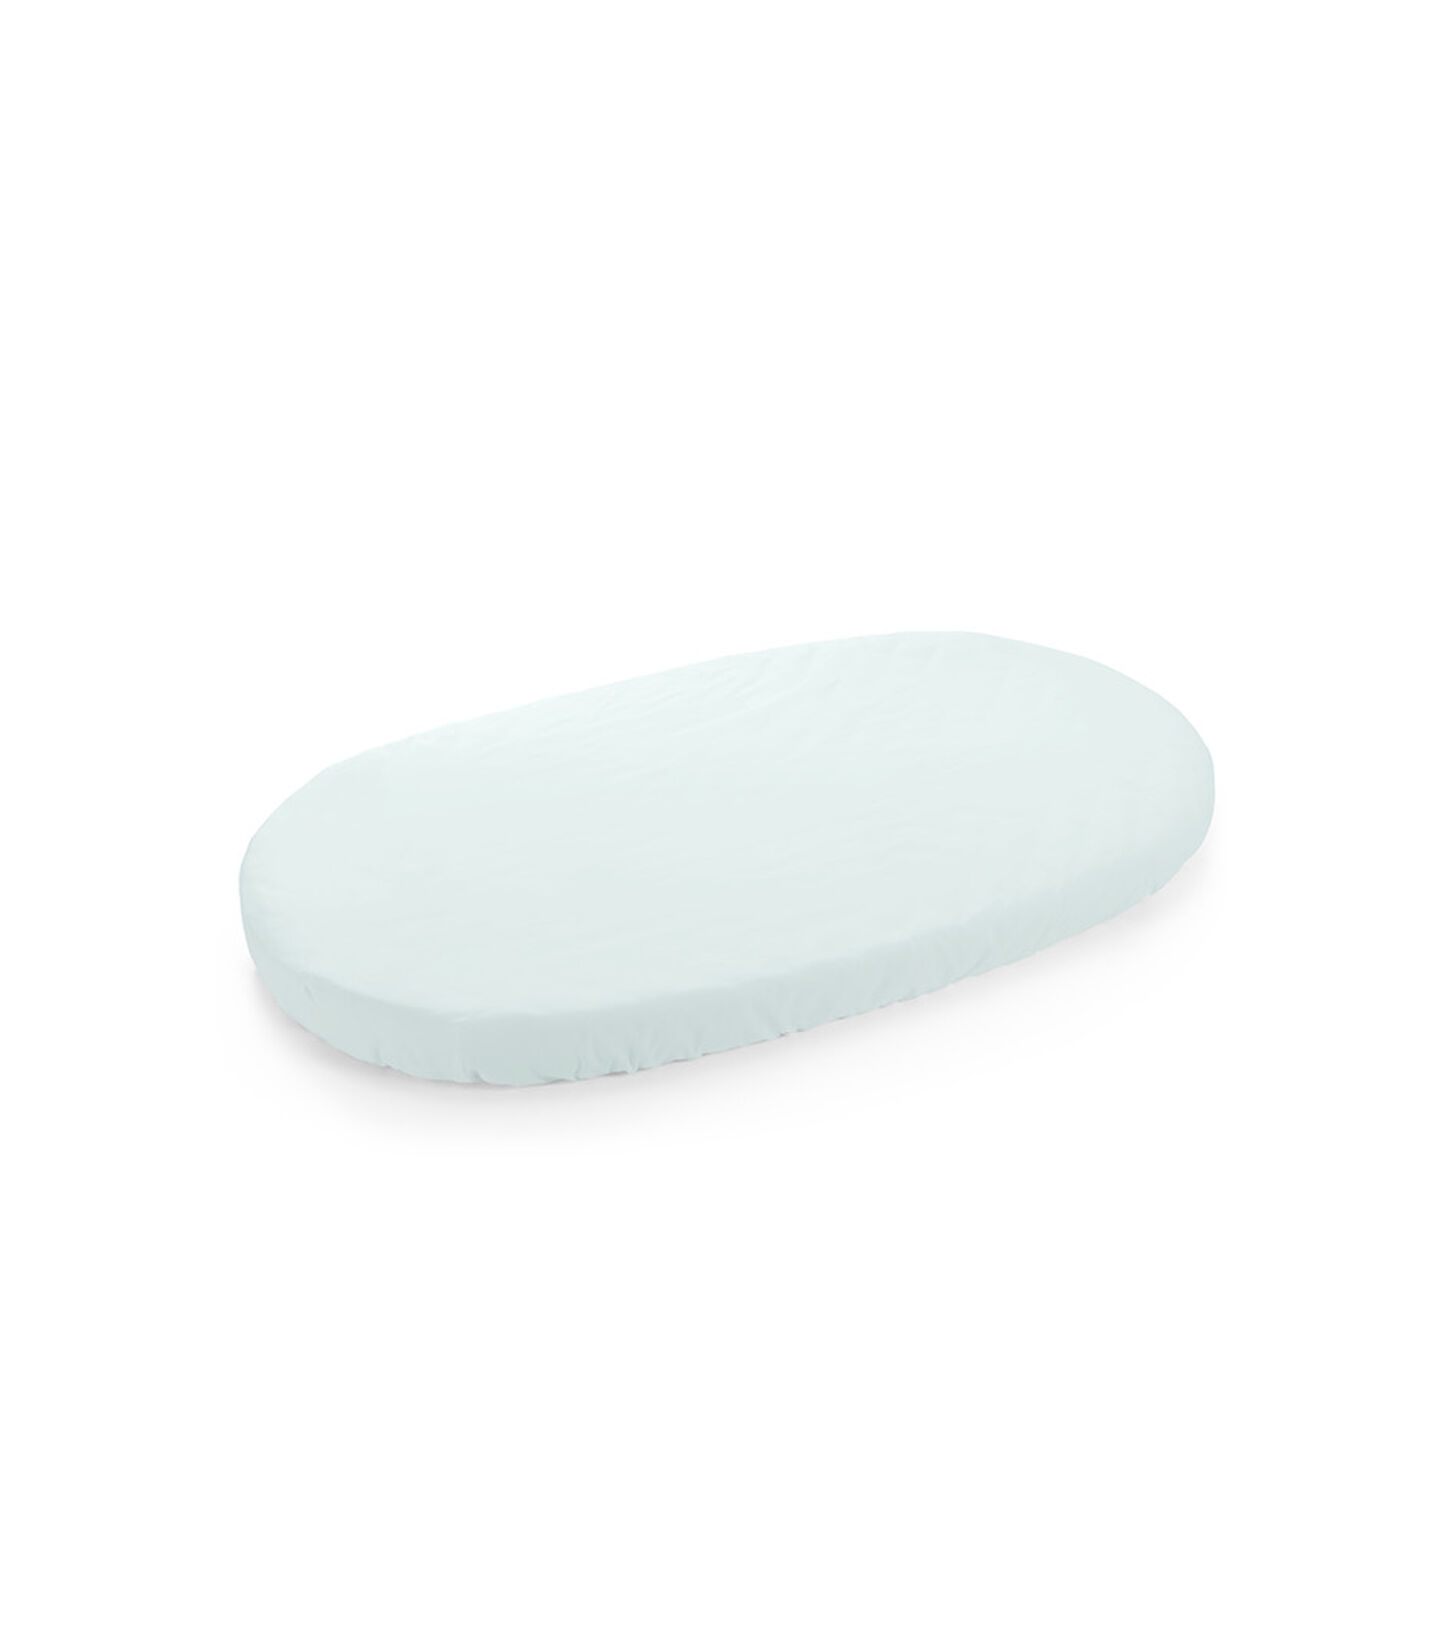 Stokke® Sleepi™ Fitted Sheet Mint, Powder Blue, mainview view 1